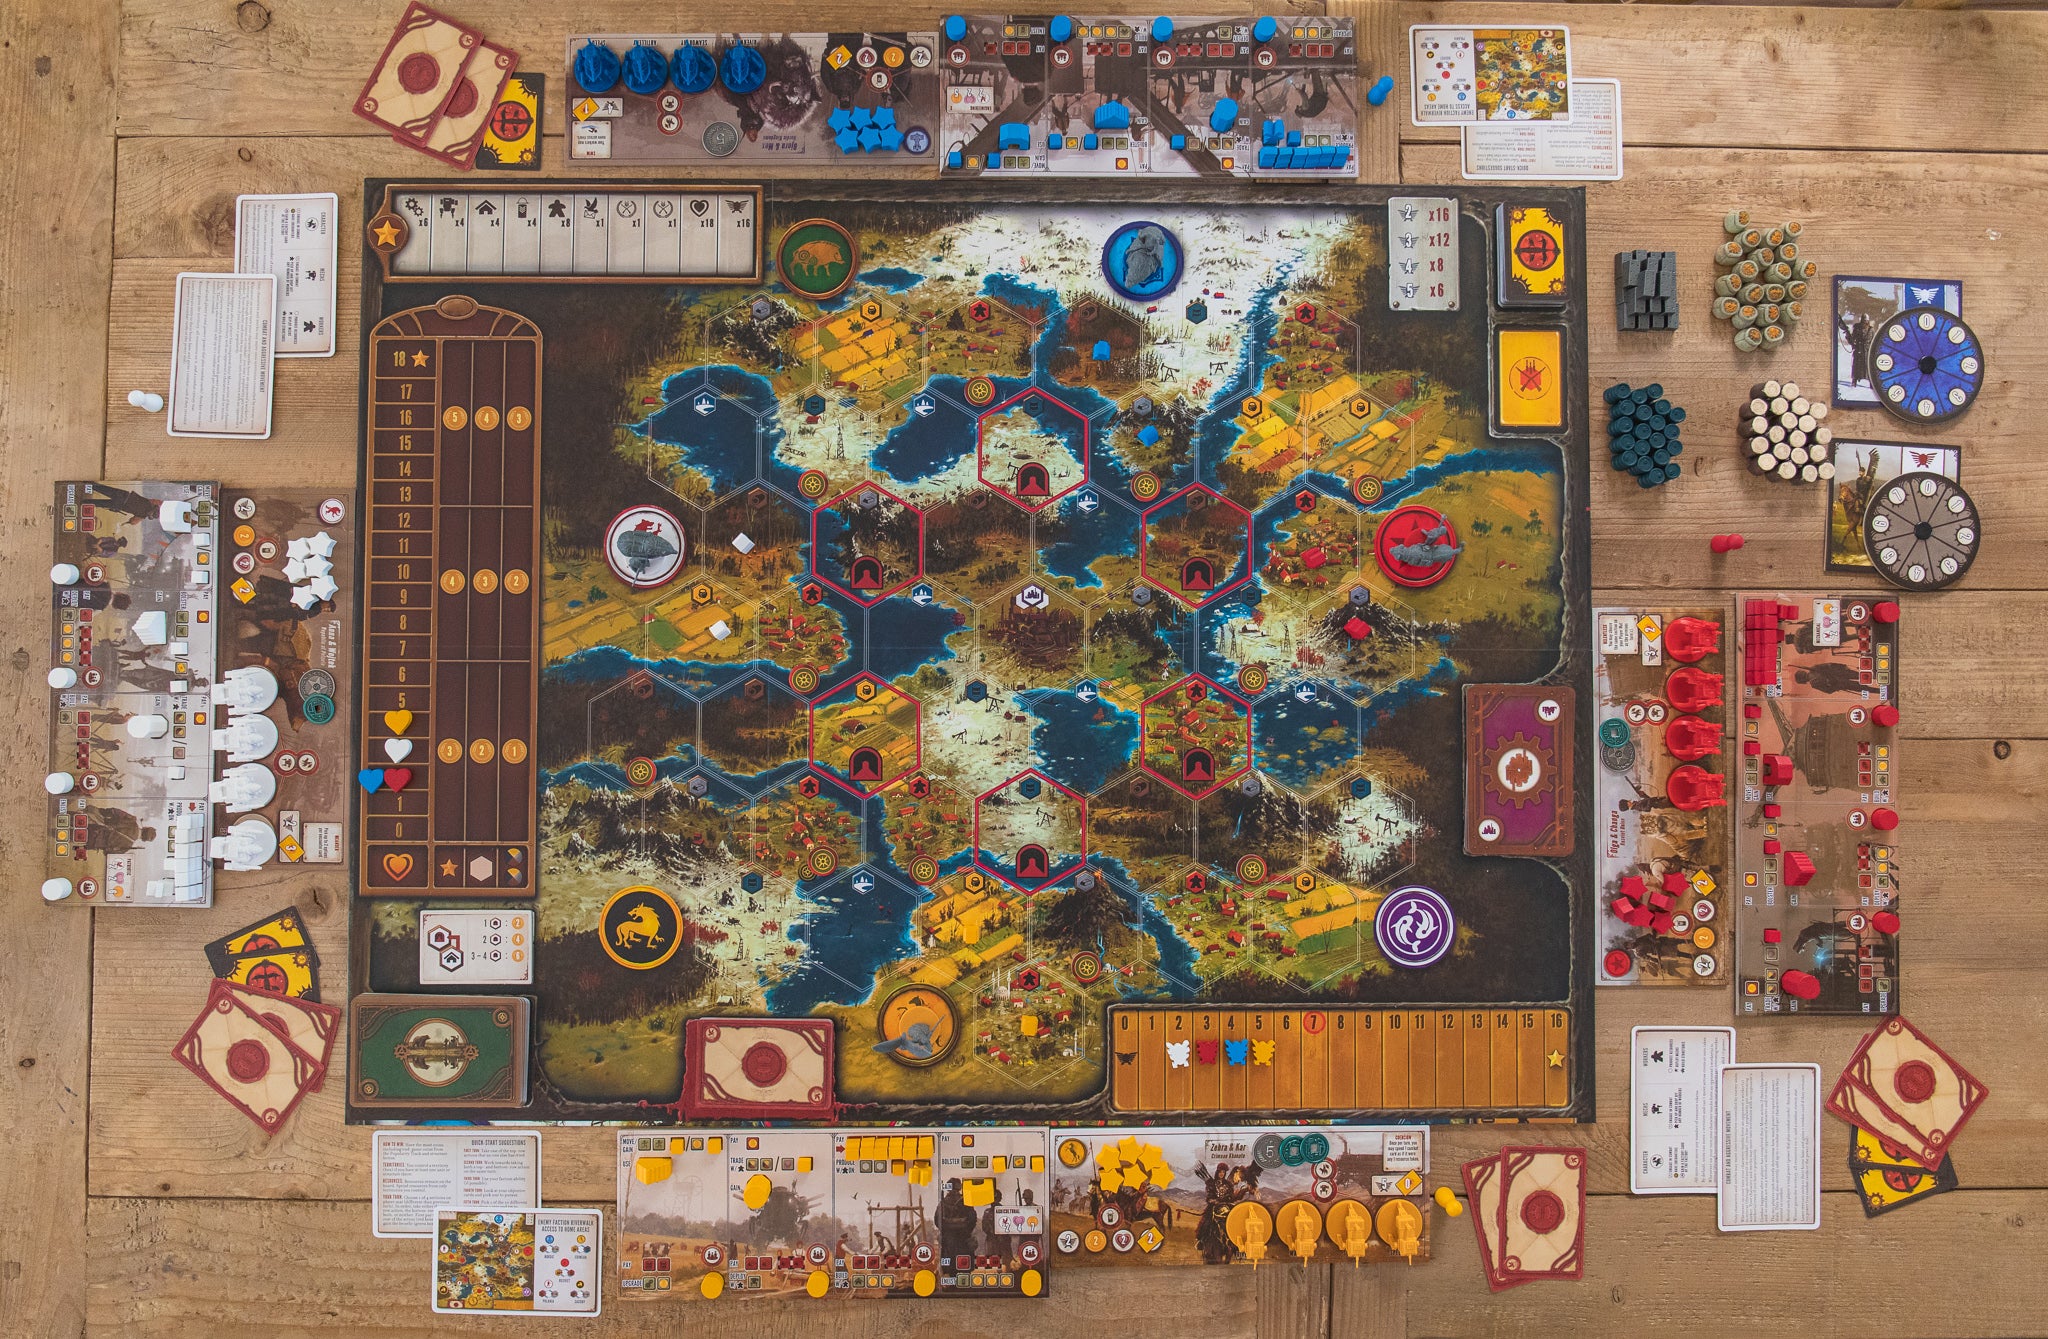 Stonemaier Games: Scythe (Base Game) | an Engine-Building, Area Control  Strategy Board Game Set in Dieselpunk 1920s Europe | for Adults and Family  